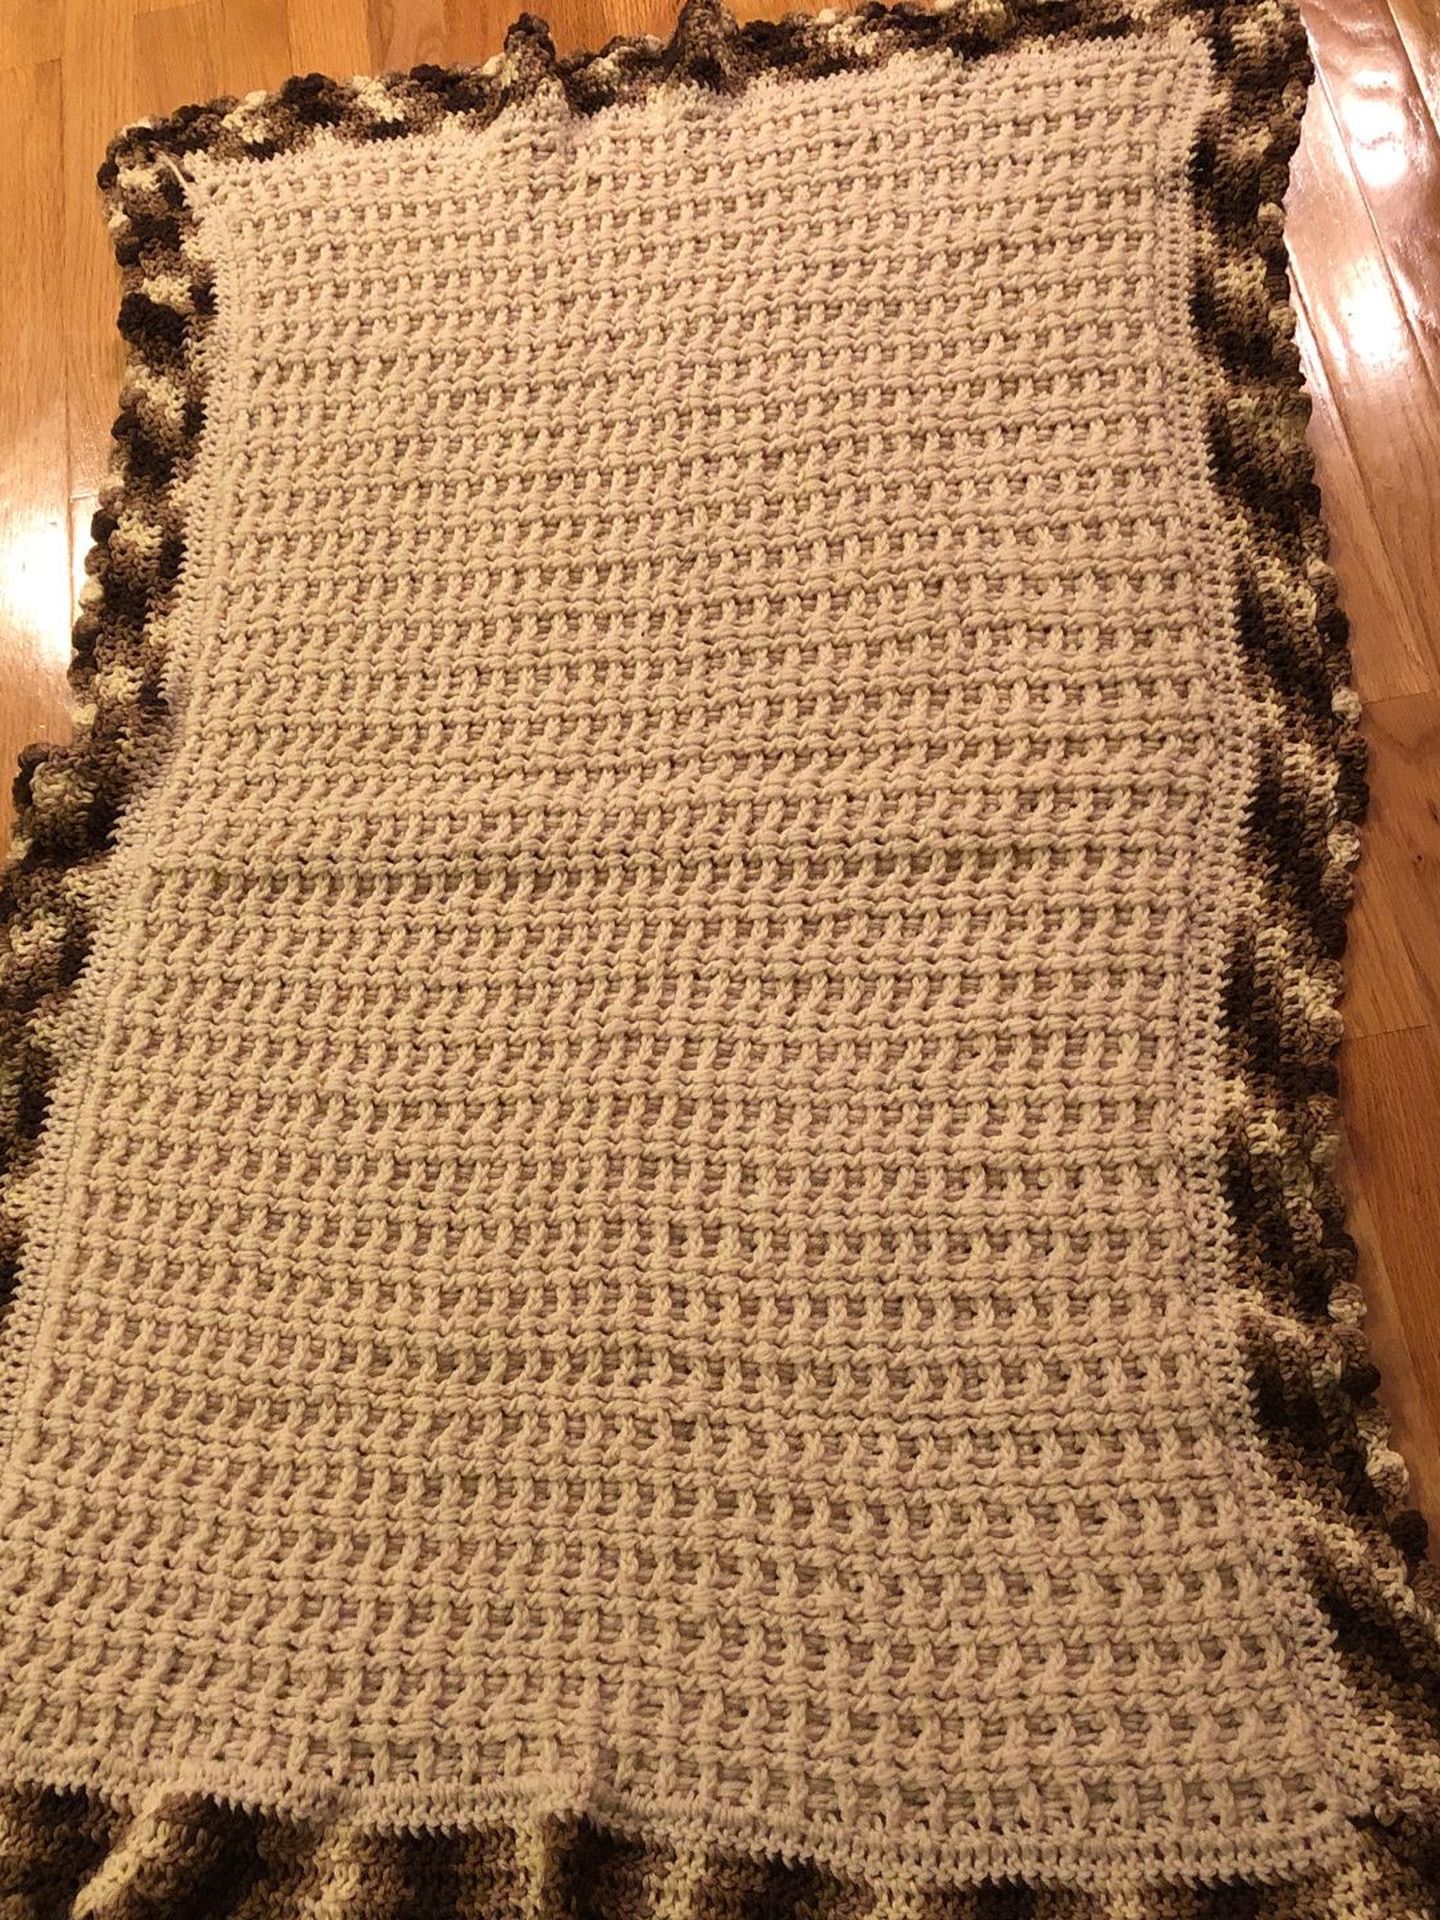 Crochet throw blanket .New never used. 3 Throws 59x47.